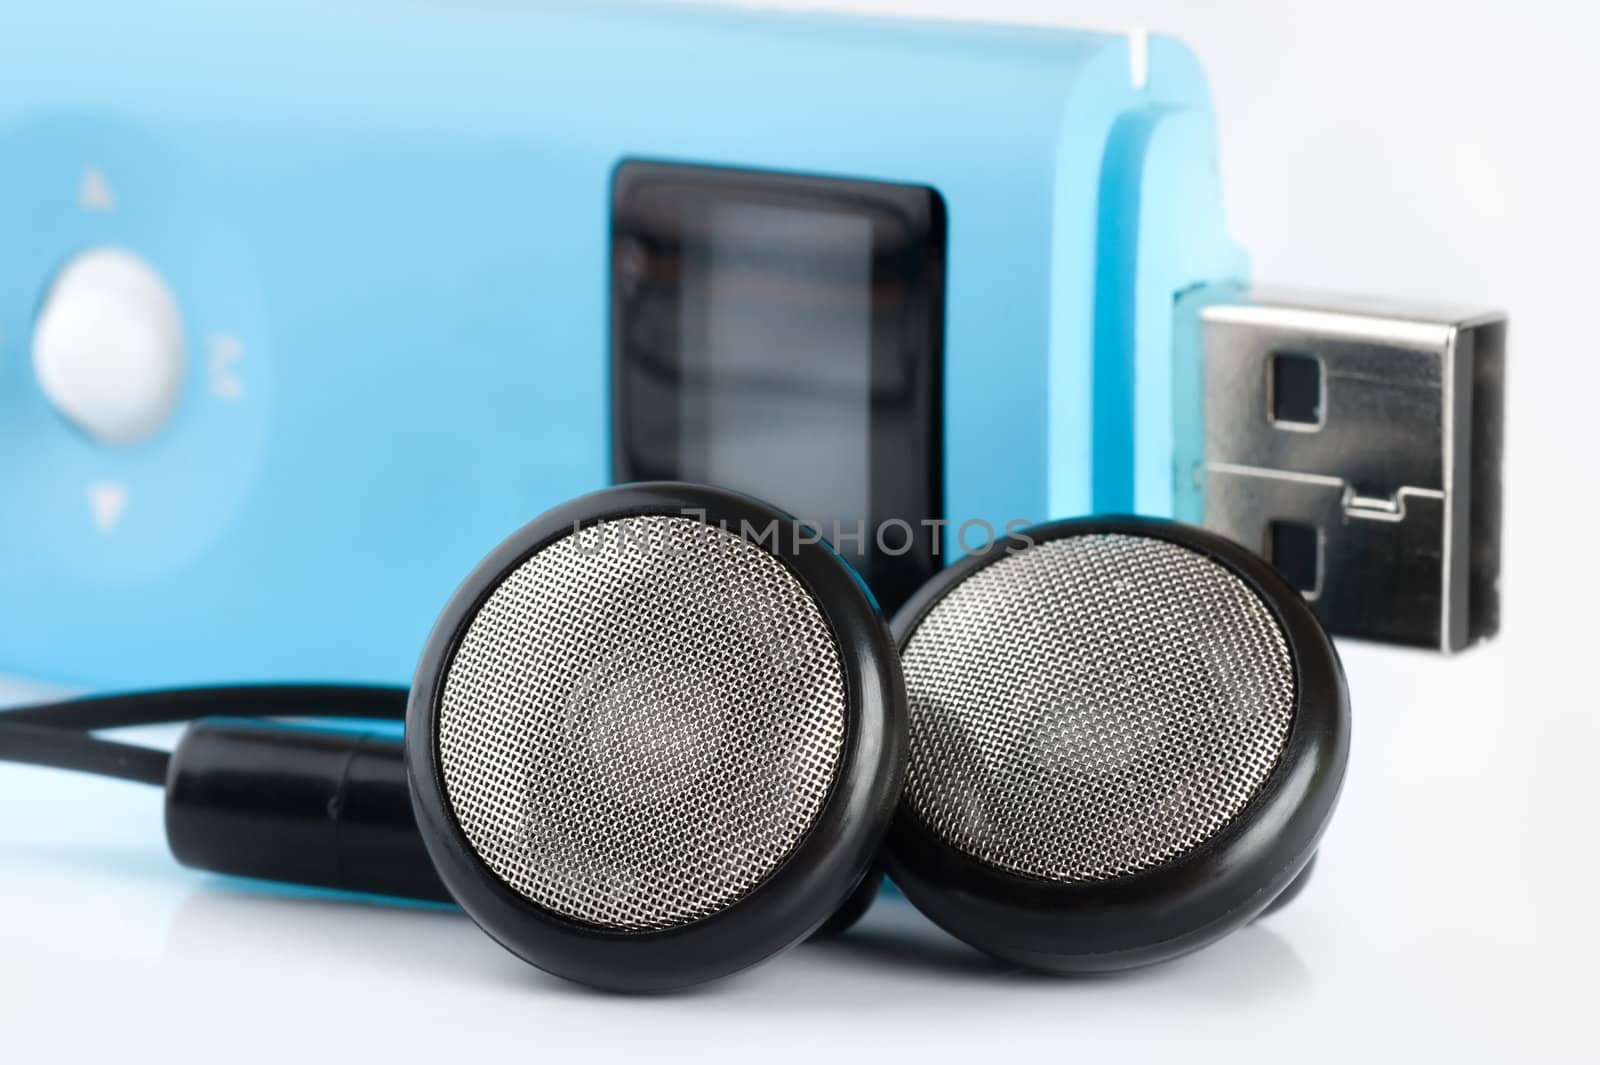 Blue MP3 player with a port USB and black headphones